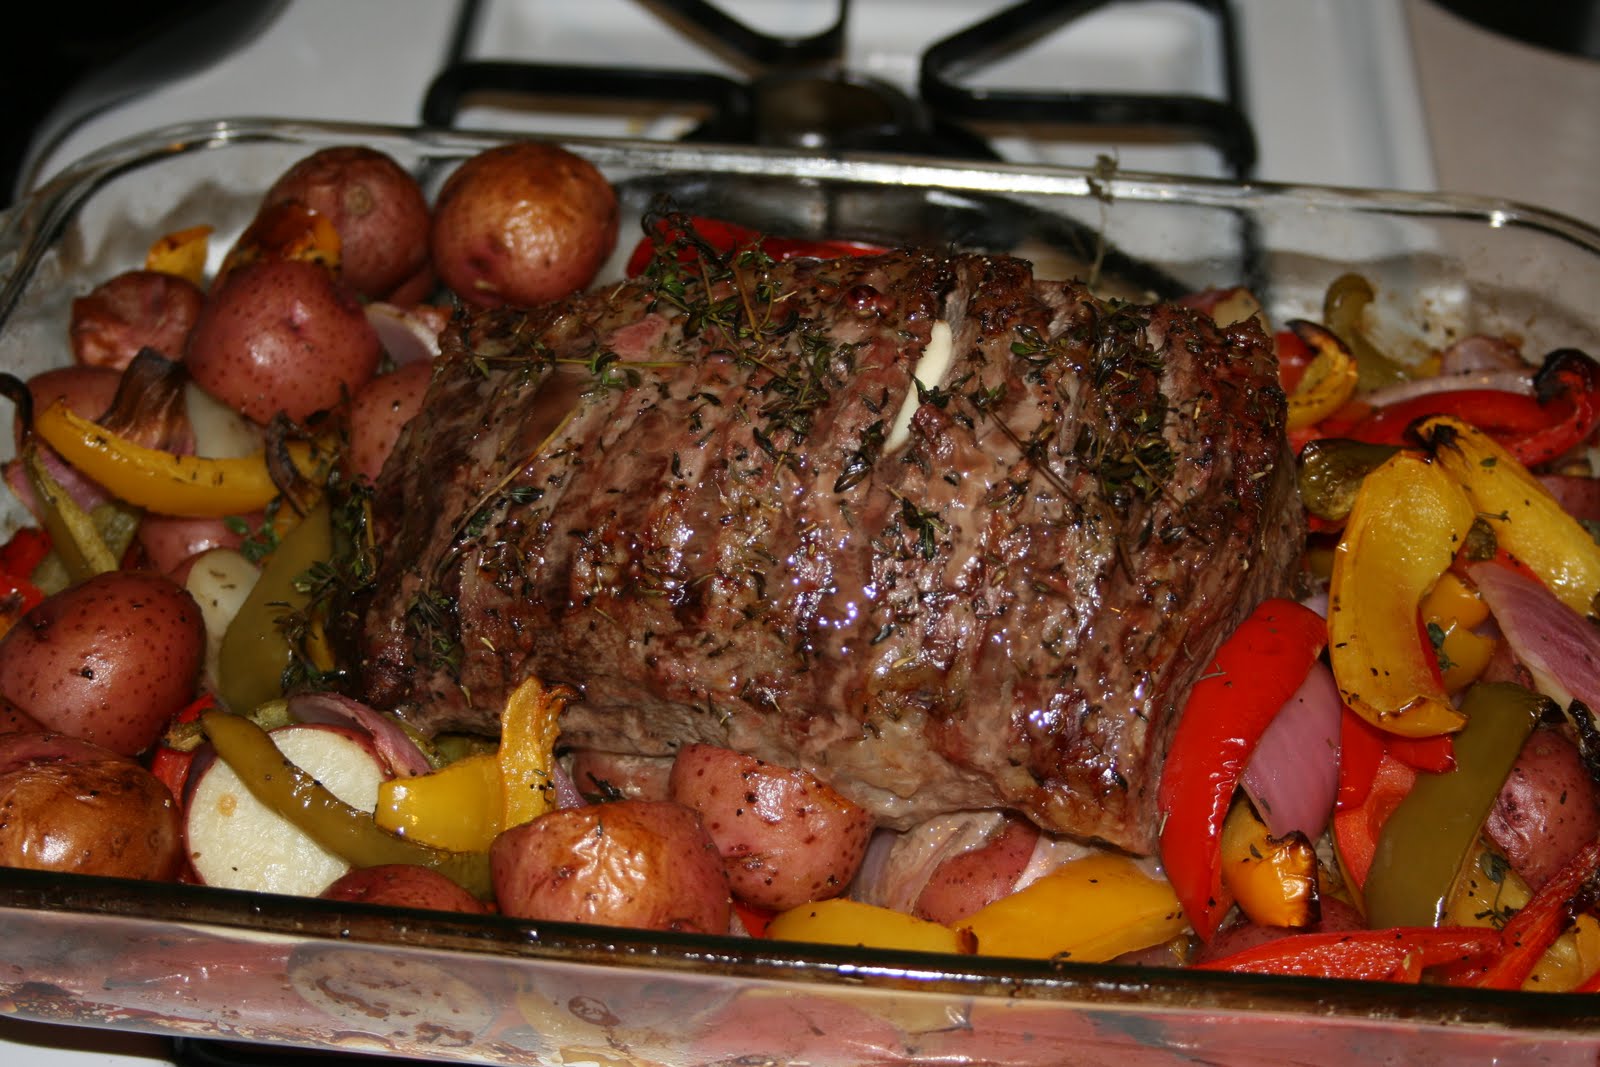 It really IS that easy to make...: Recipe #51: Roast Beef with Peppers